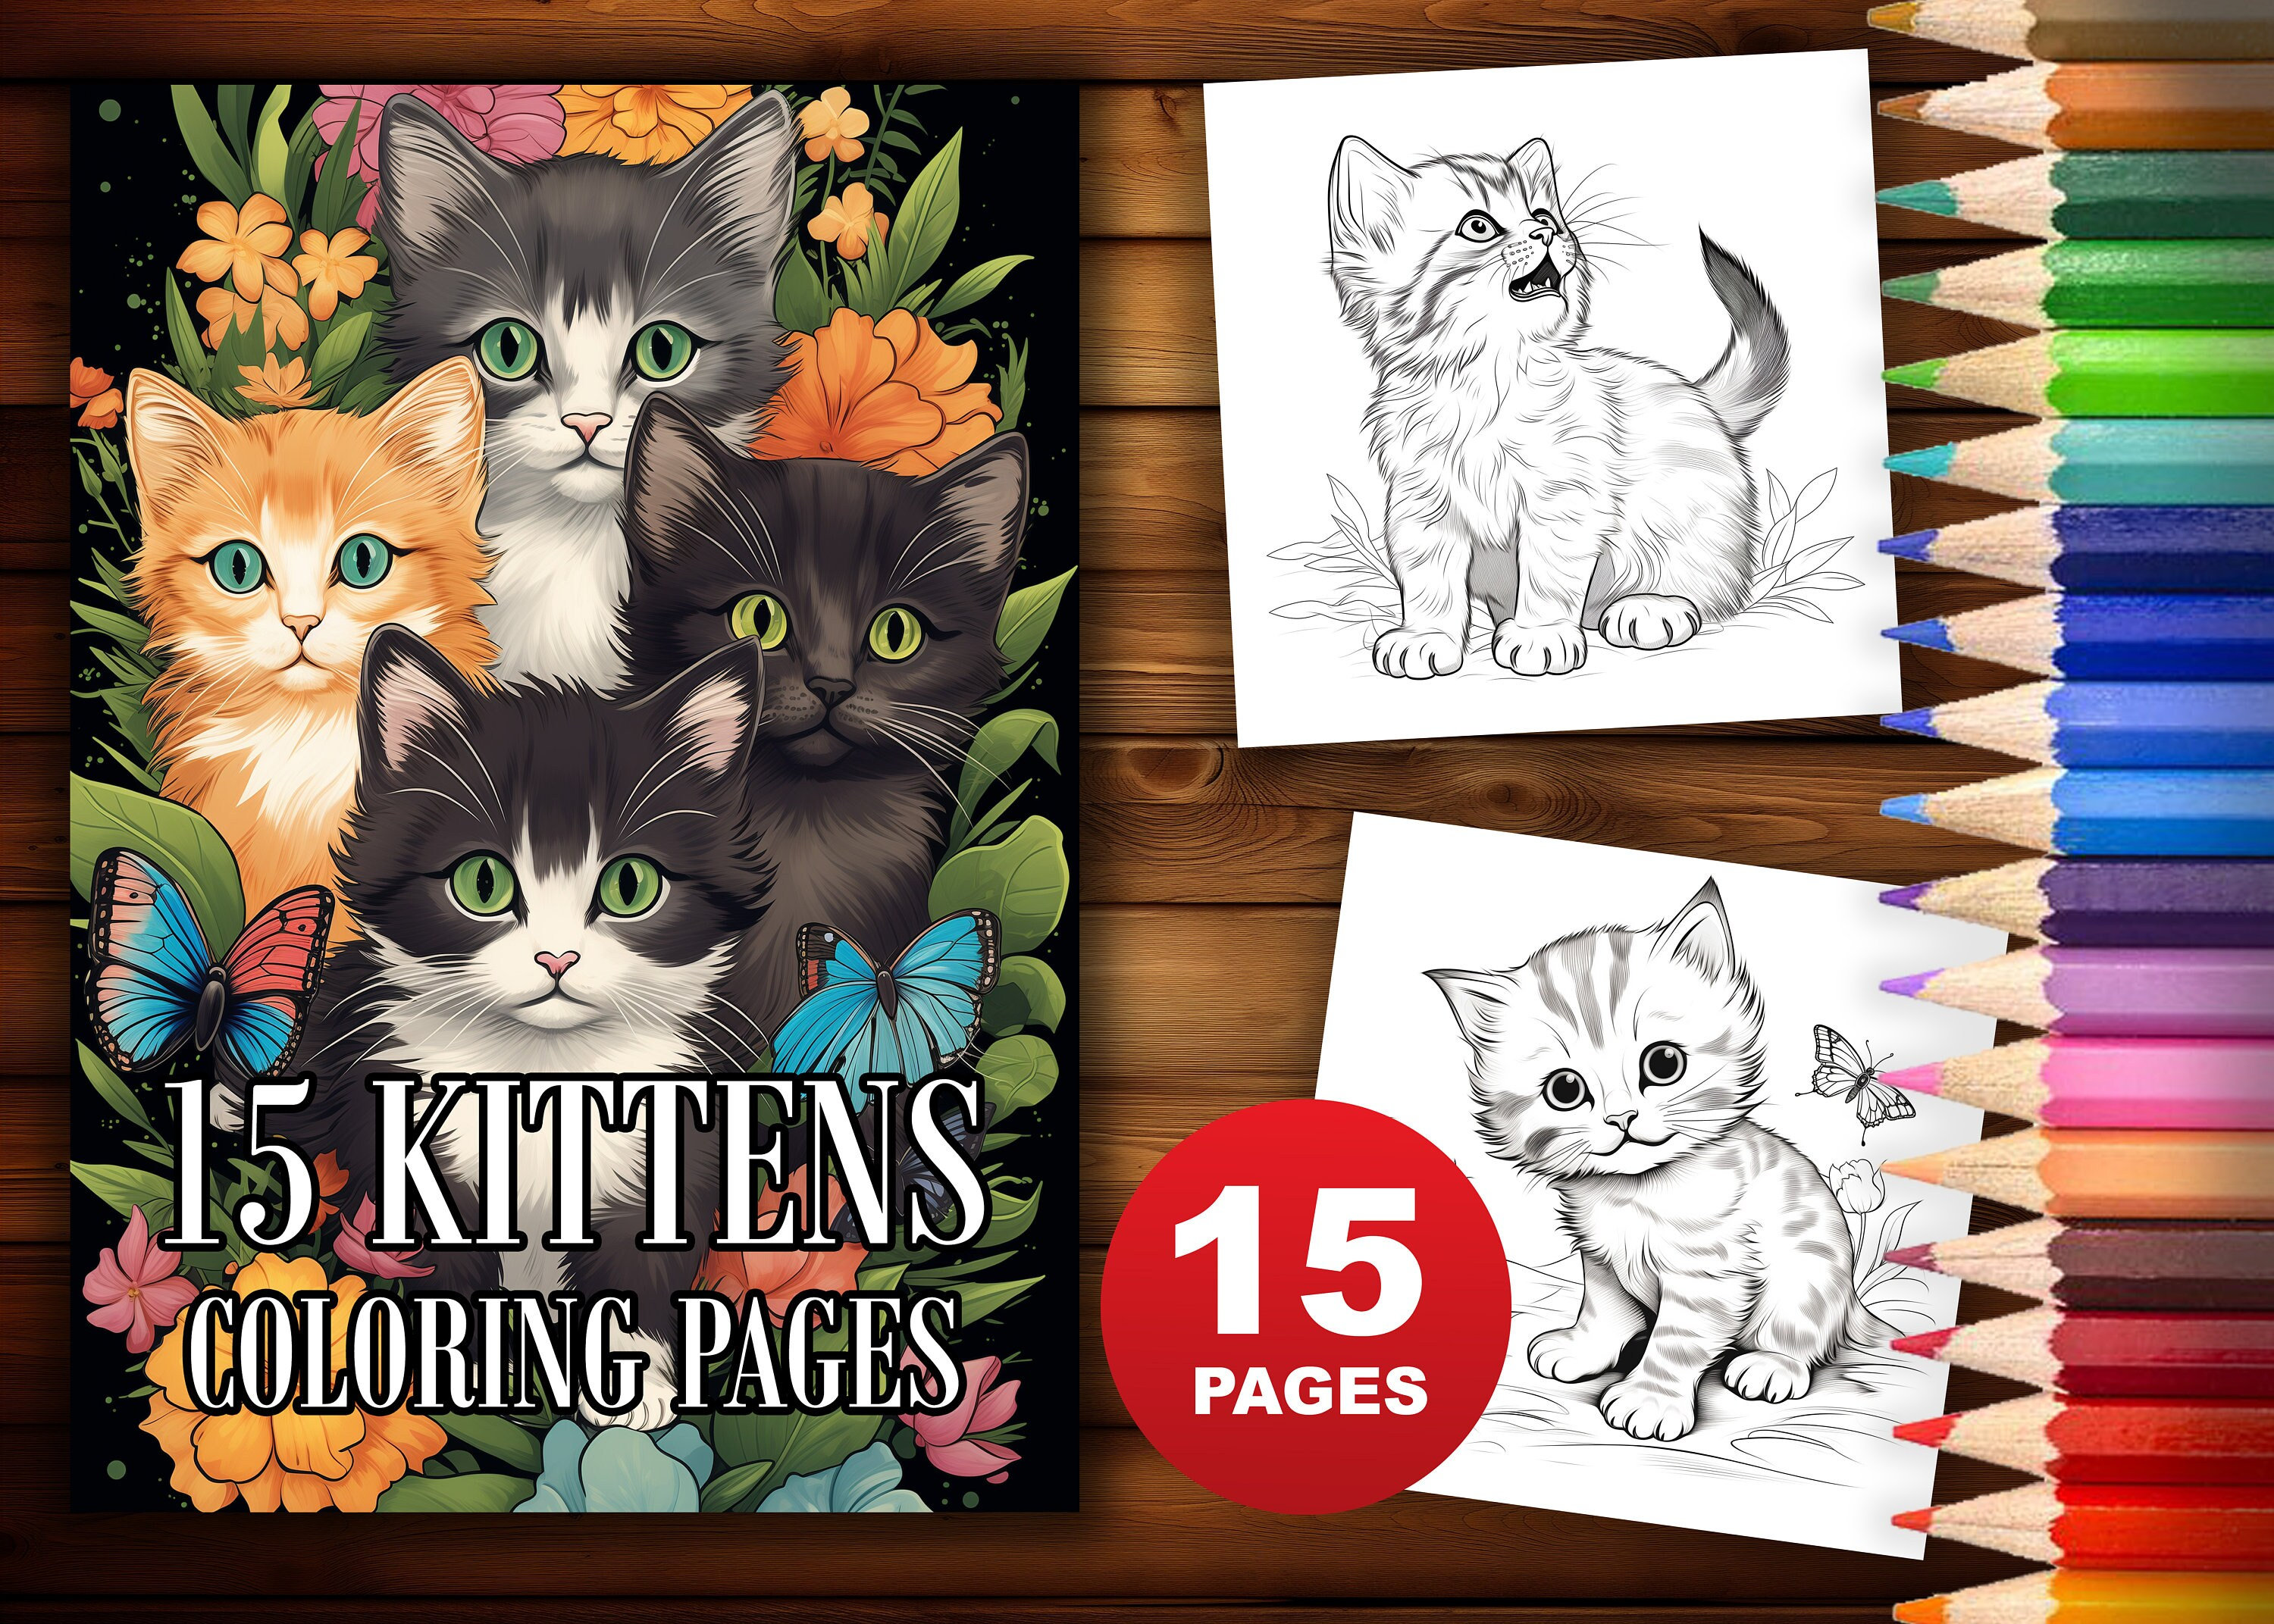 Cats With Mandalas: an Adult Coloring Book With 50 Coloring Pages of Cute  and Loving Cats printable PDF / Instant Download 